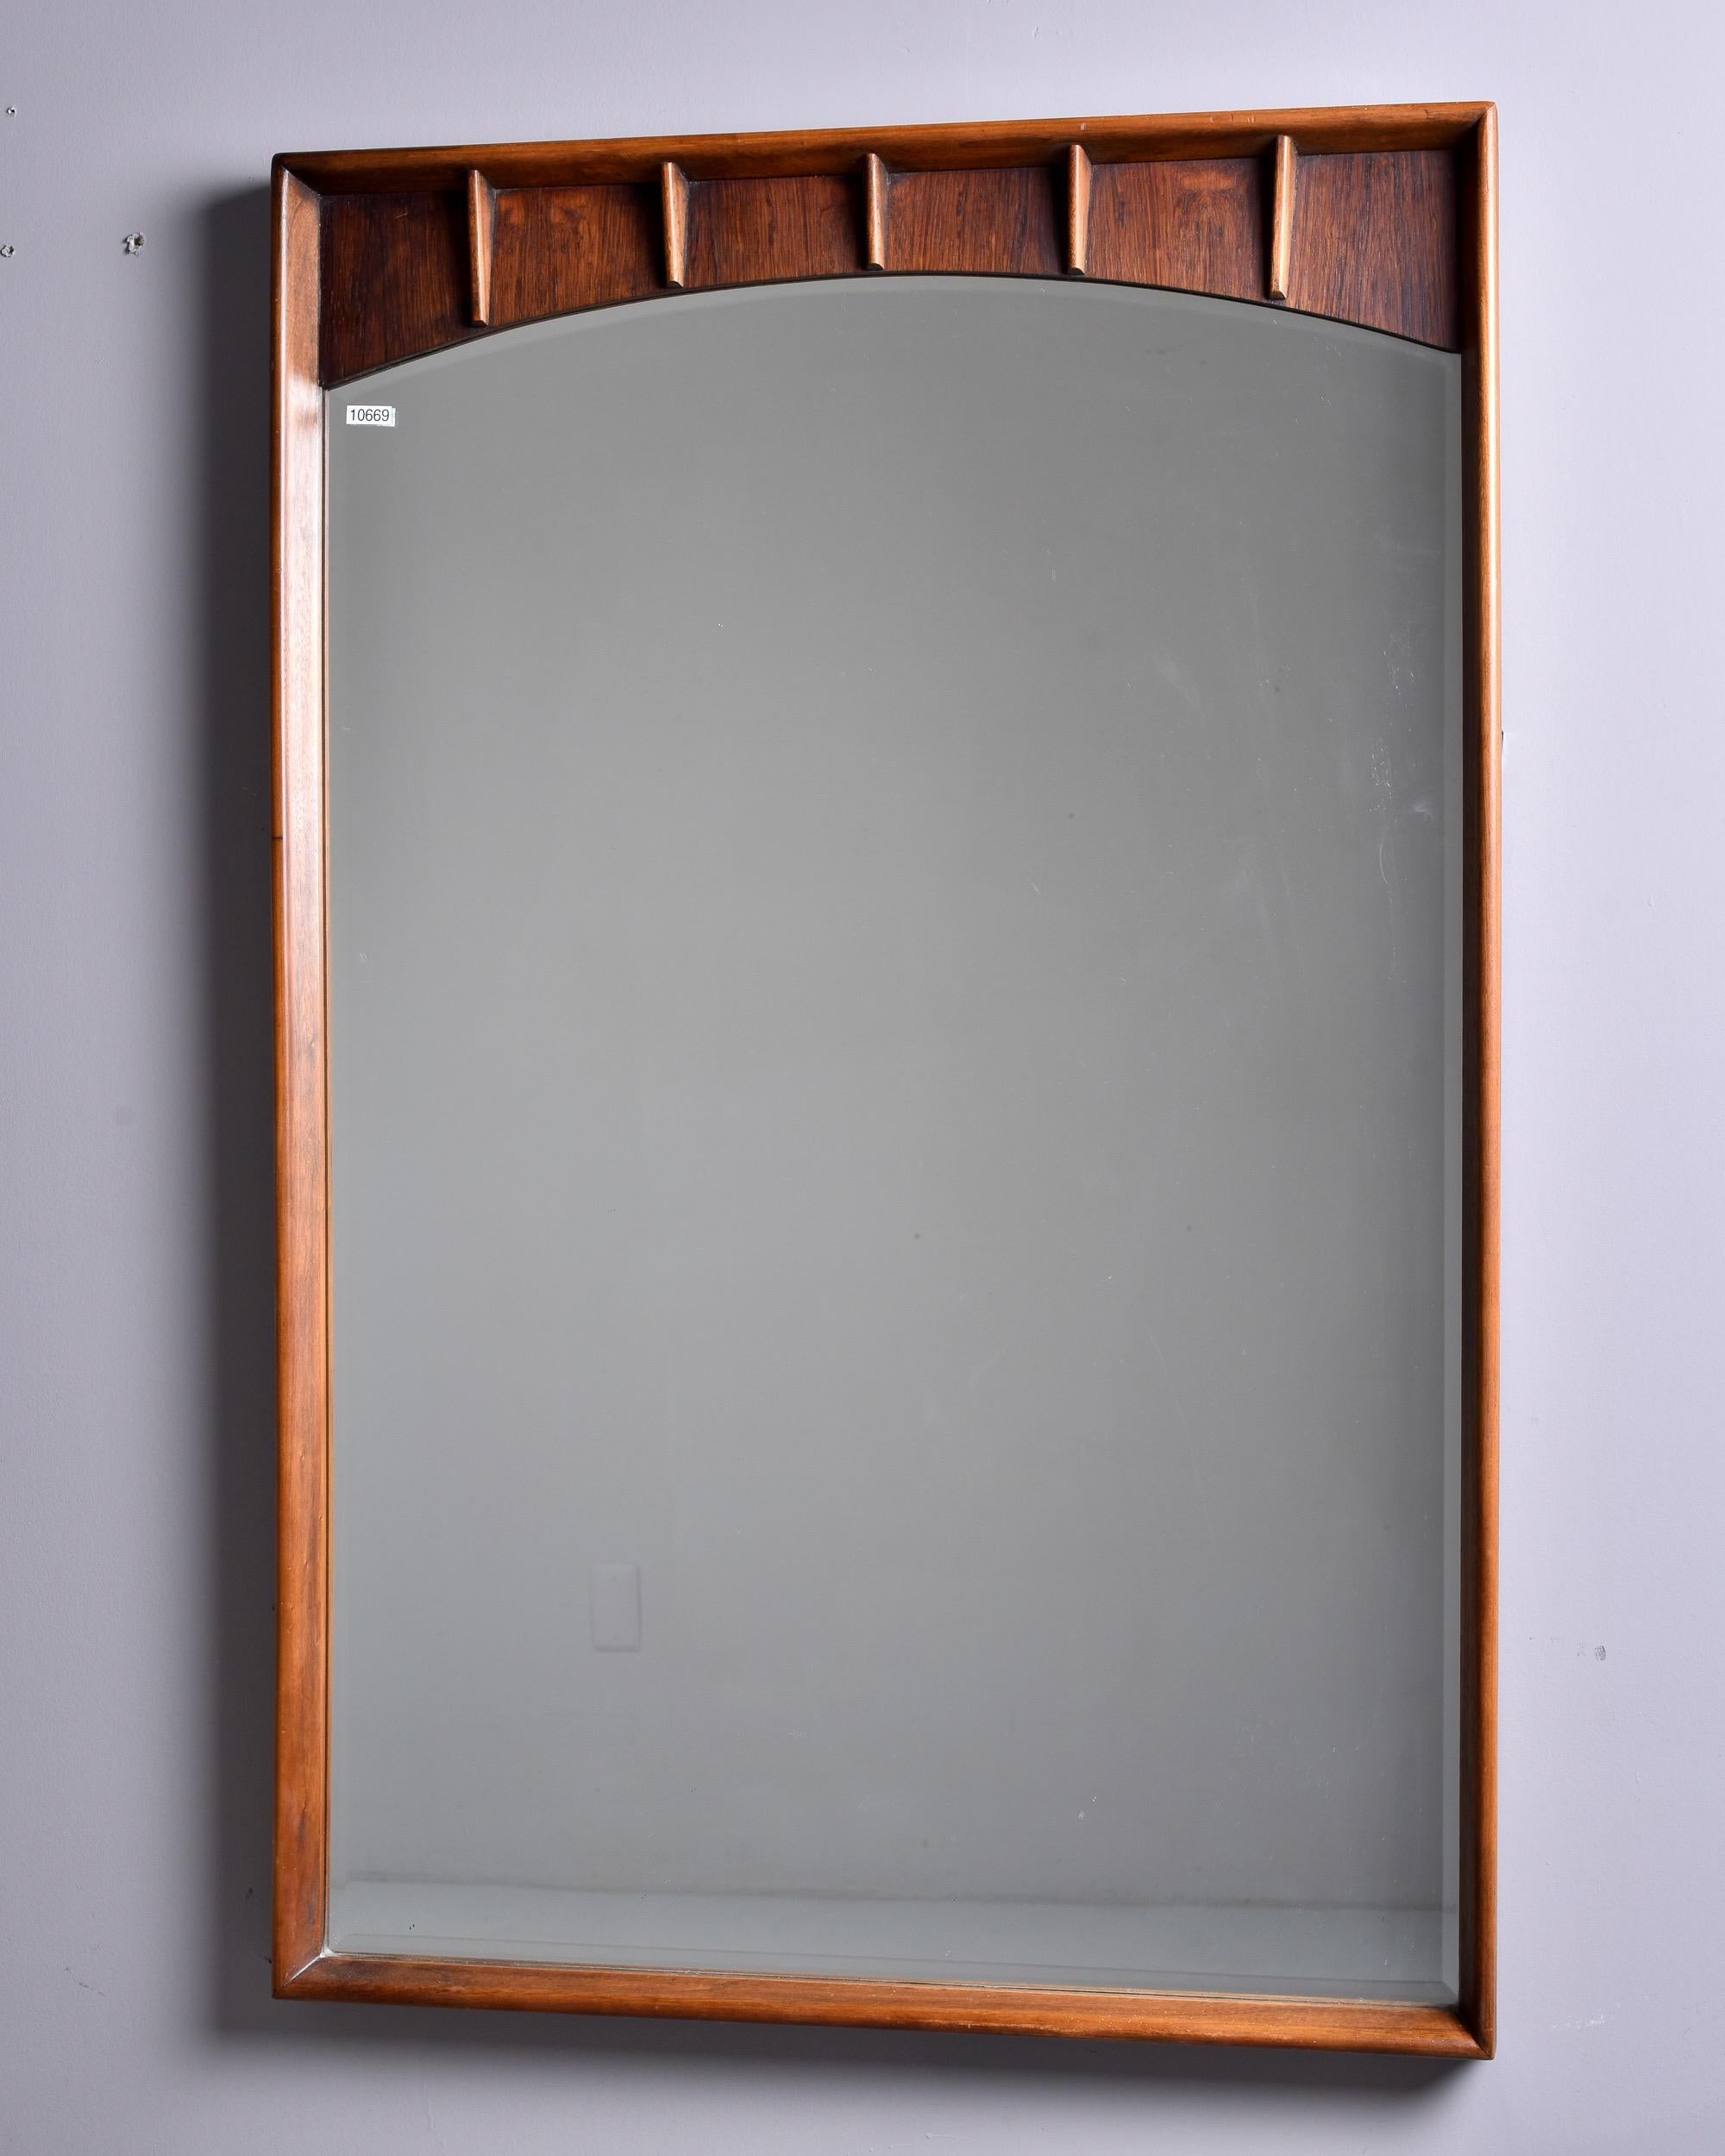 20th Century Mid Century Walnut and Pecan Framed Mirror with Beveled Edges For Sale